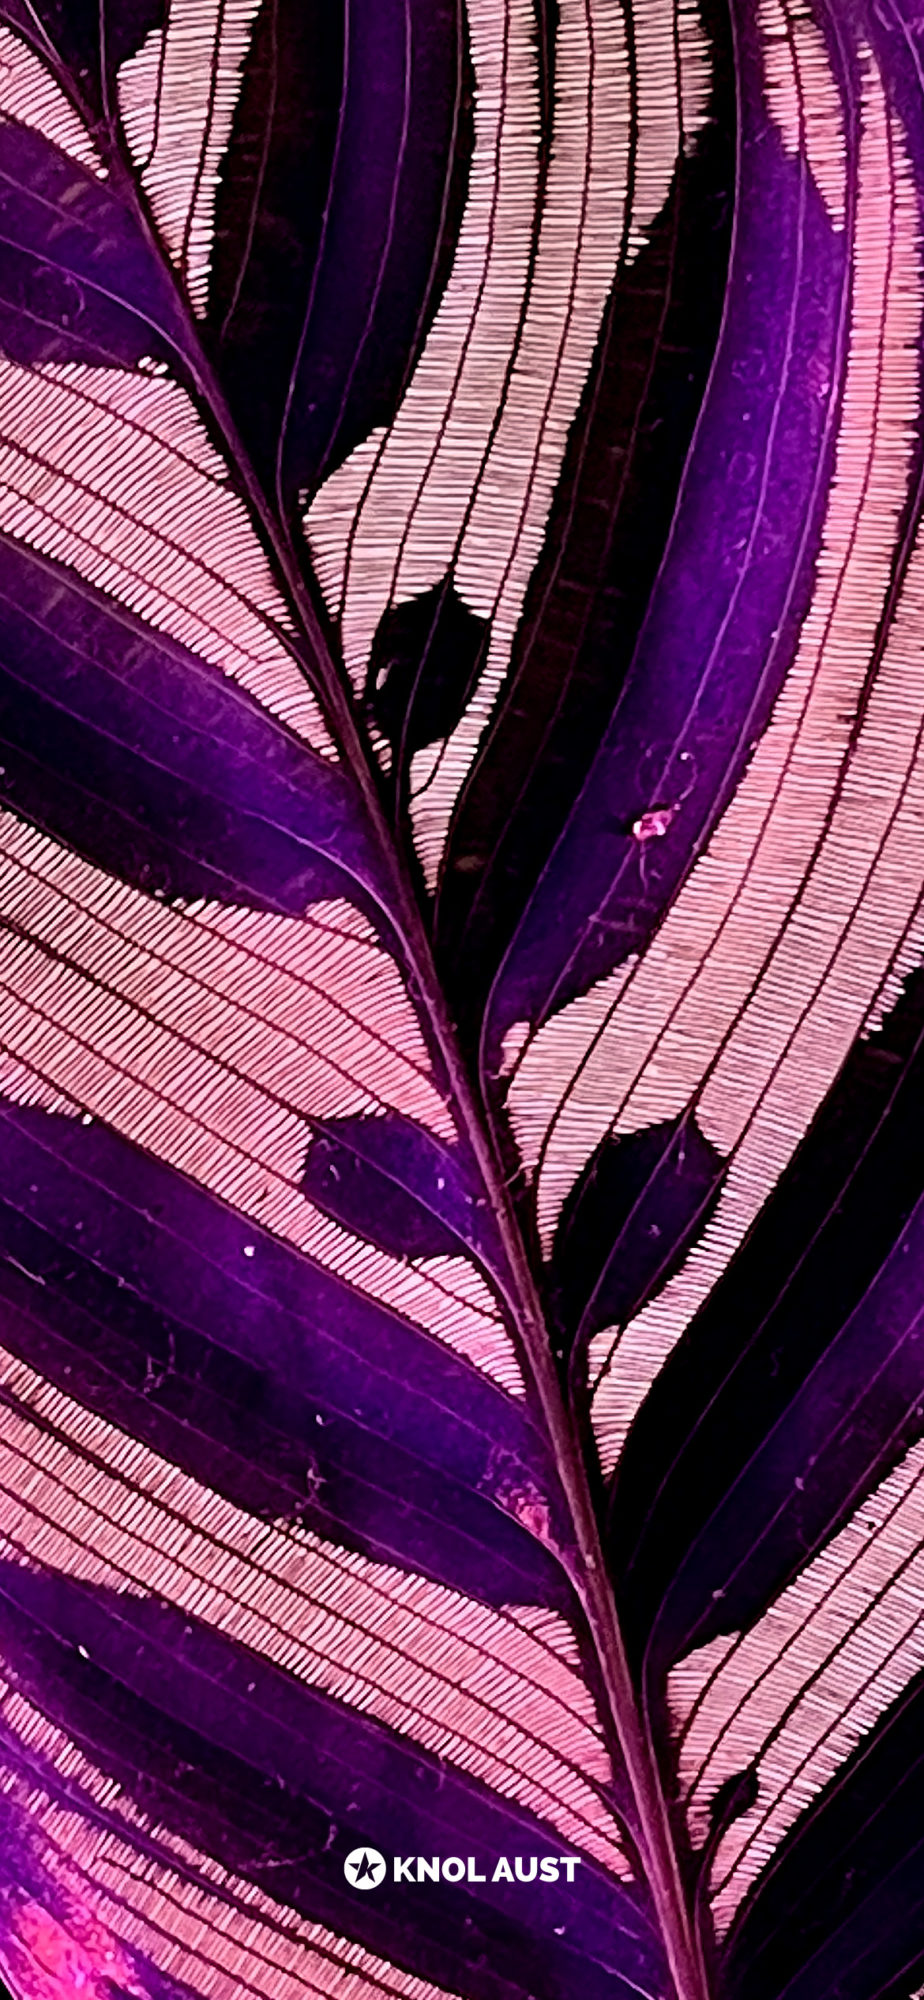 Photo of a Calathea makoyana with a magenta background made for smartphone devices